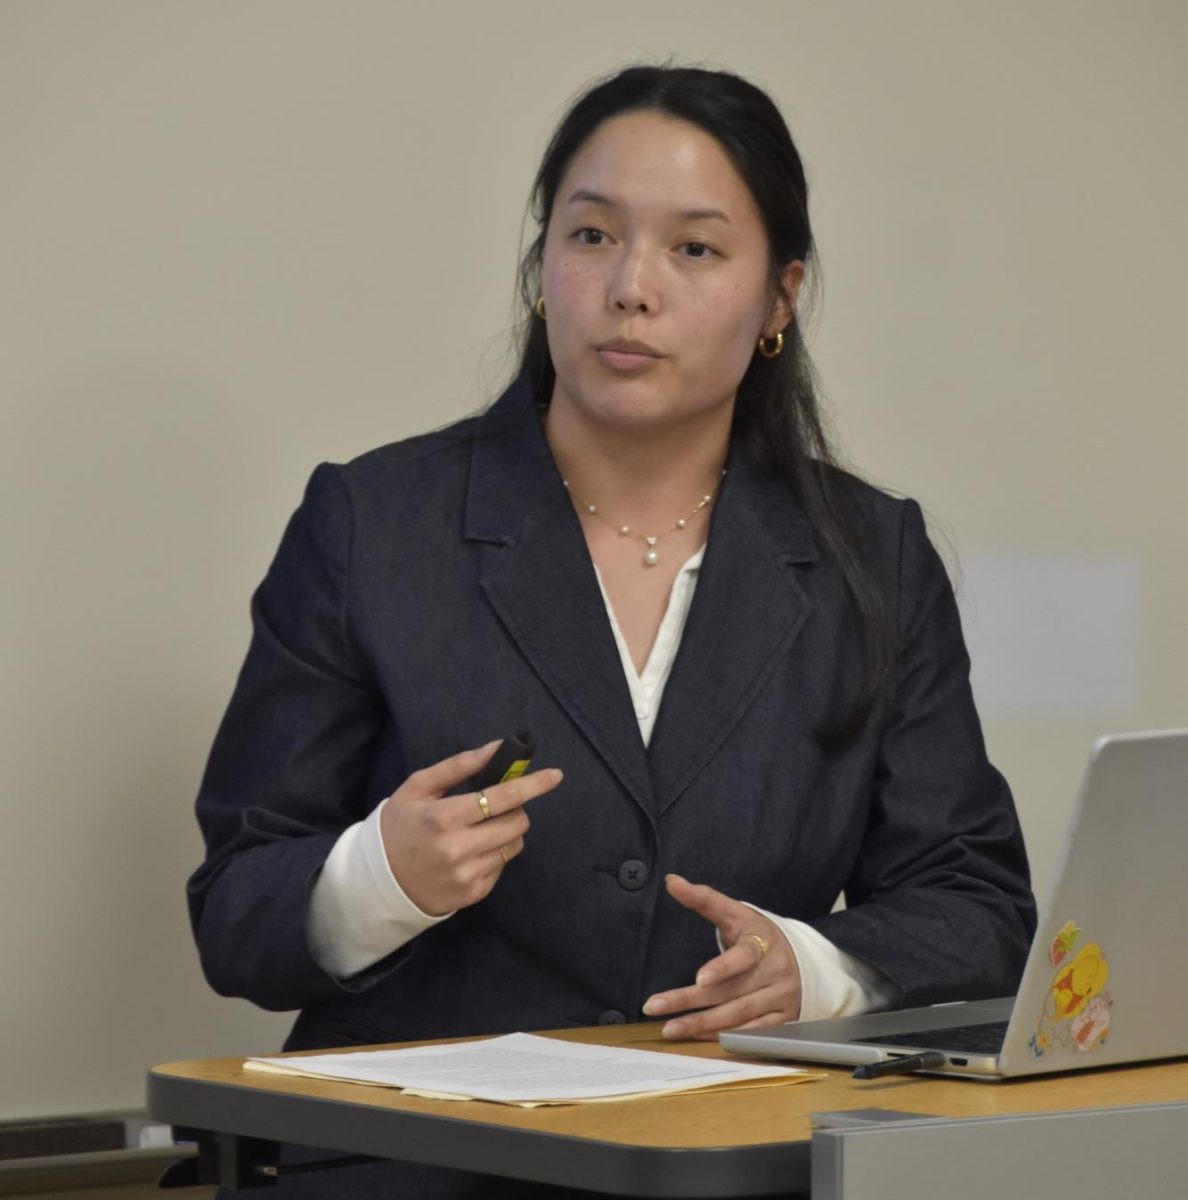 Editor-in-chief Aliyah Ramirez presents her research centered around A Tough Climb publication at Stanford.